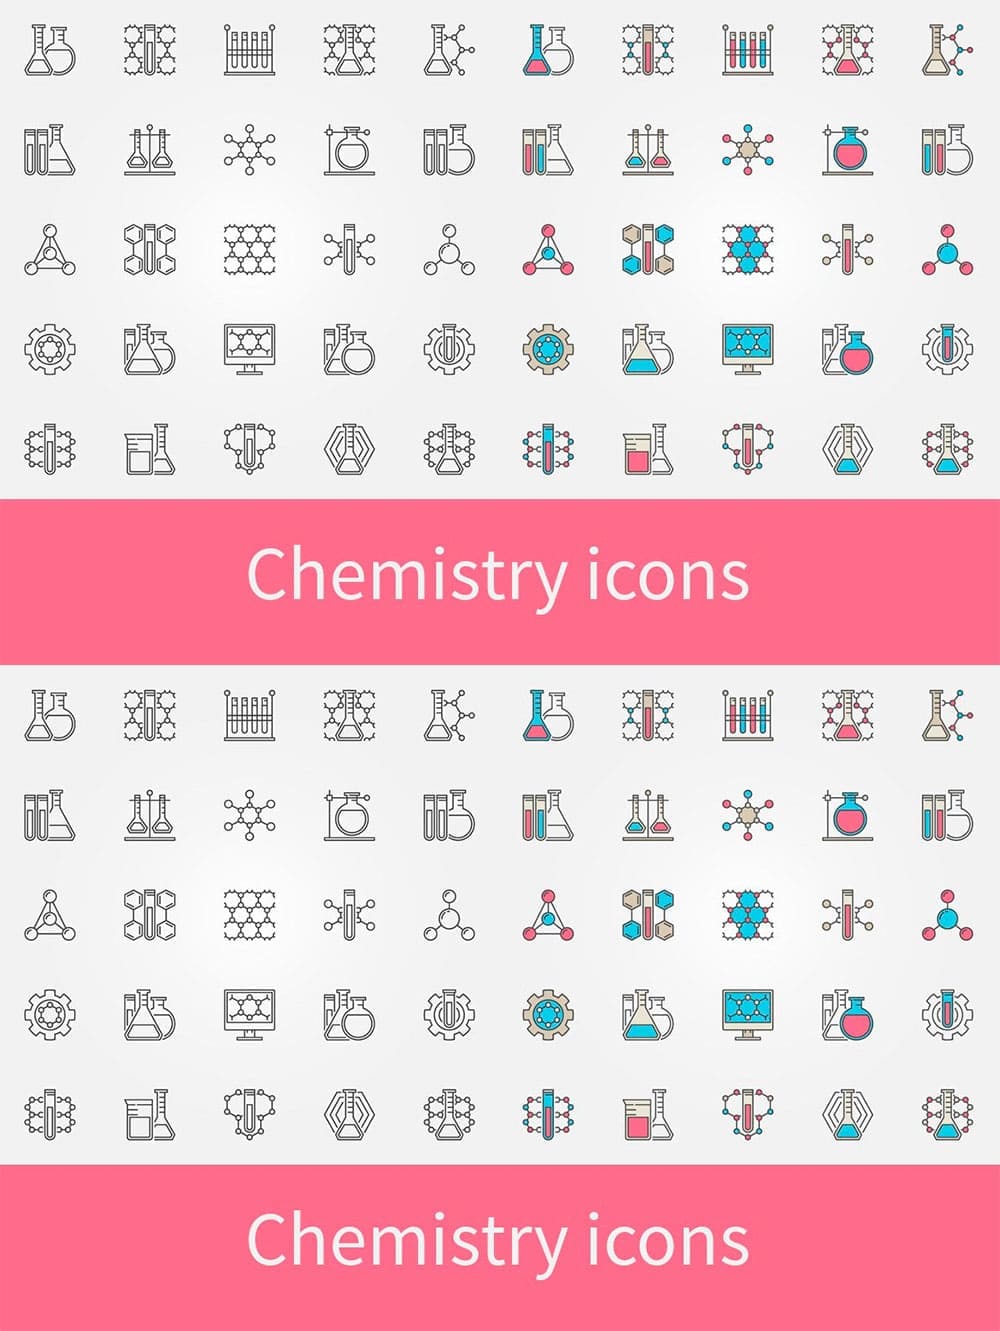 Chemistry icons, picture for pinterest.